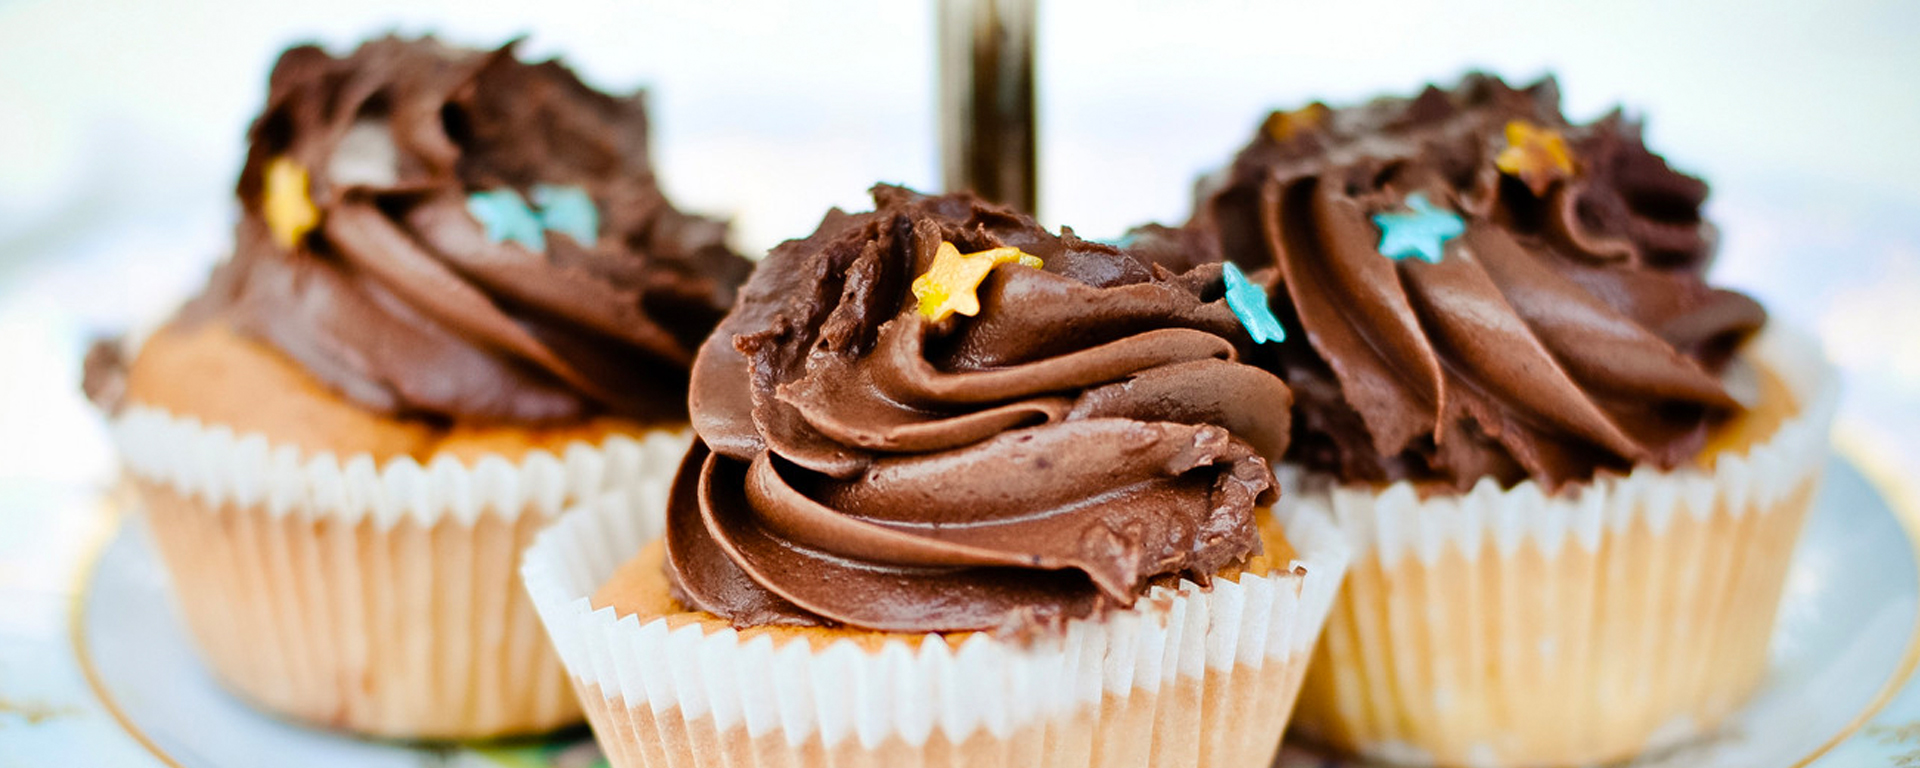 Photo for - Chocolate Chips and Mascarpone Cupcakes